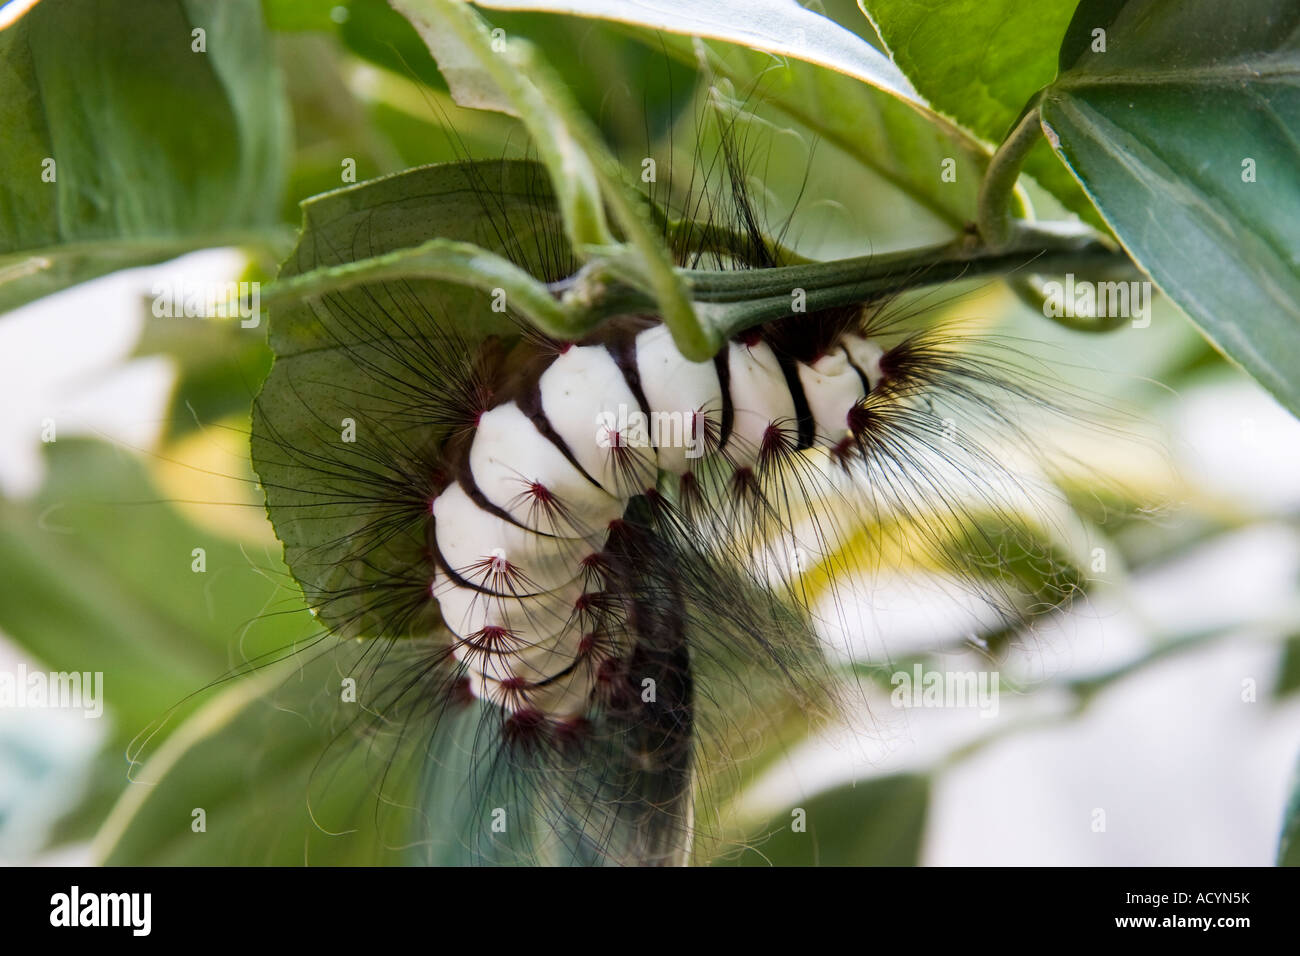 White And Black Hairy Caterpillar With Red Spots Stock Photo